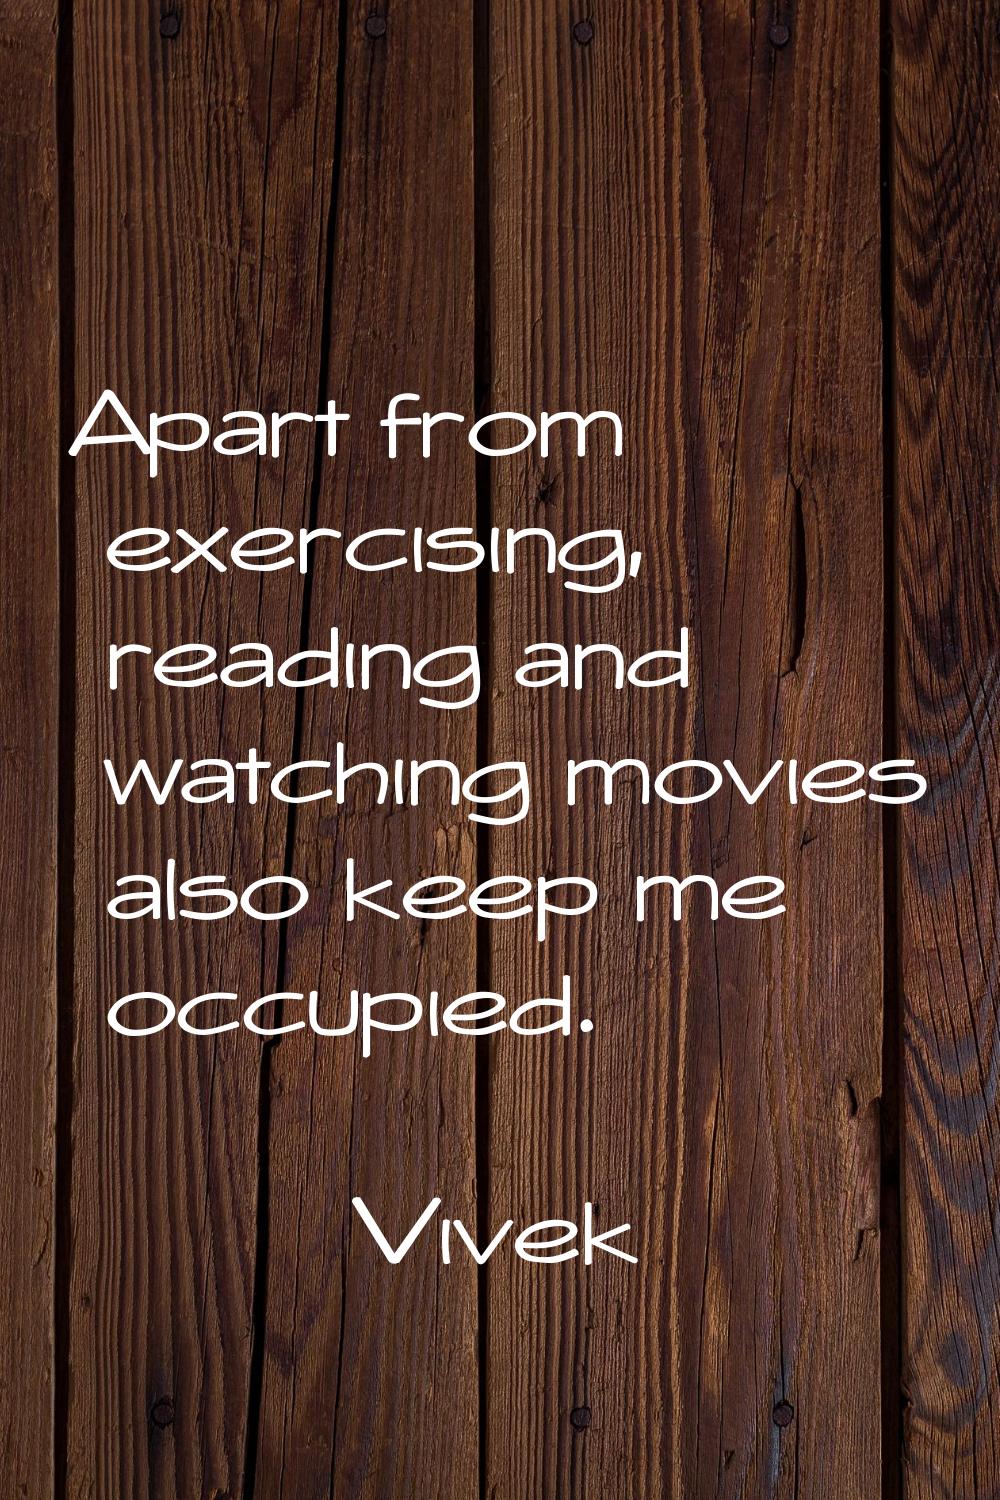 Apart from exercising, reading and watching movies also keep me occupied.